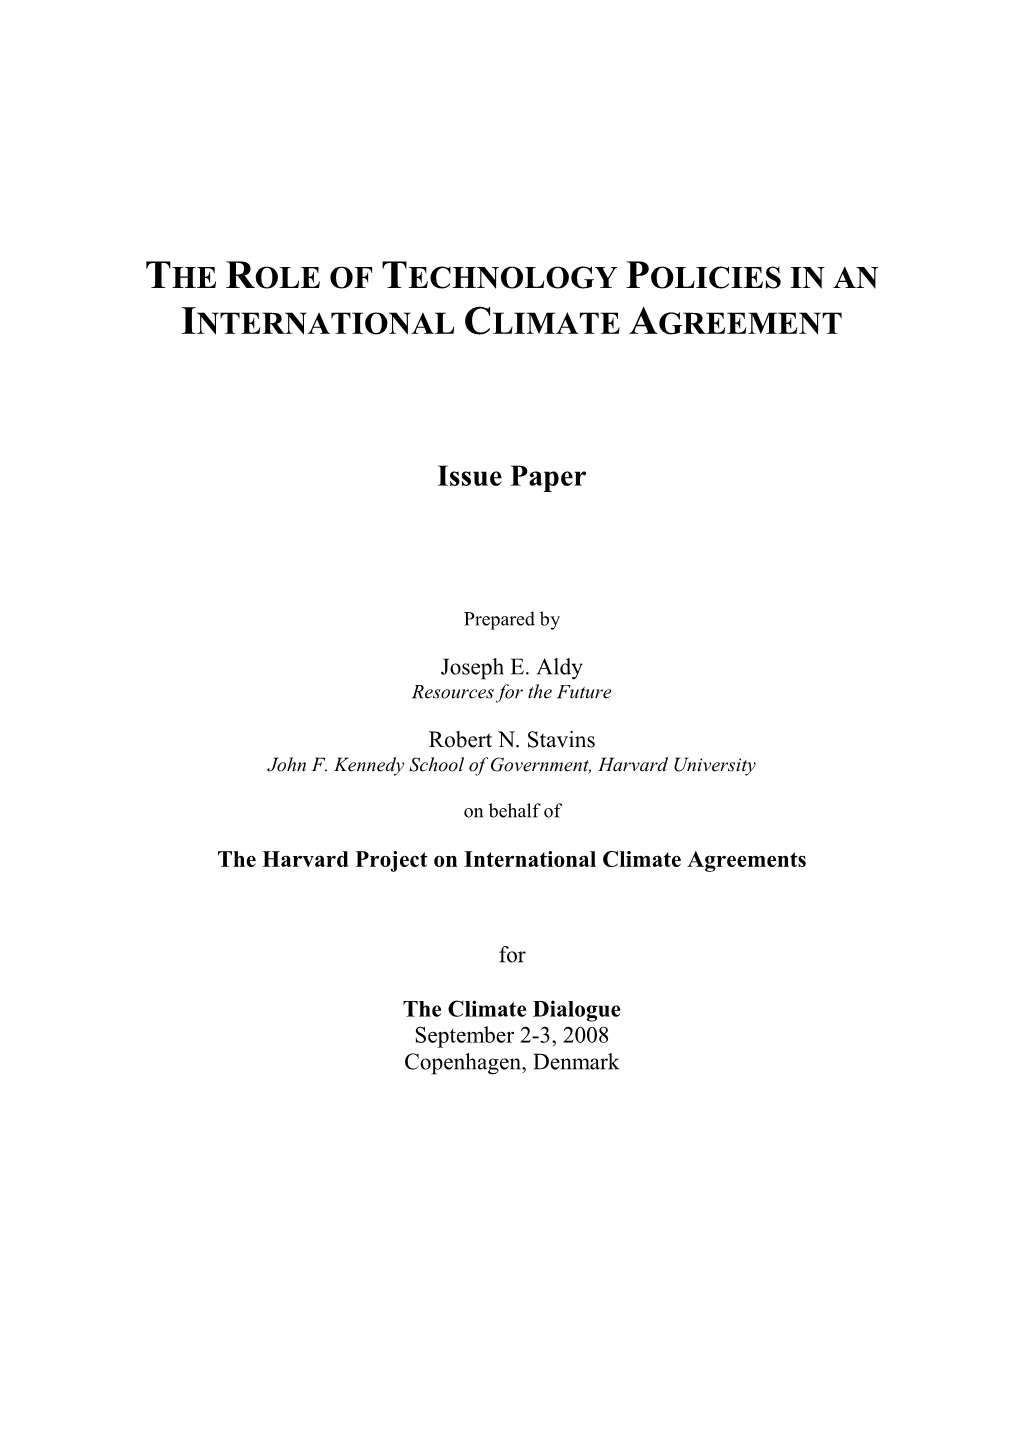 The Role of Technology Policies in an International Climate Agreement